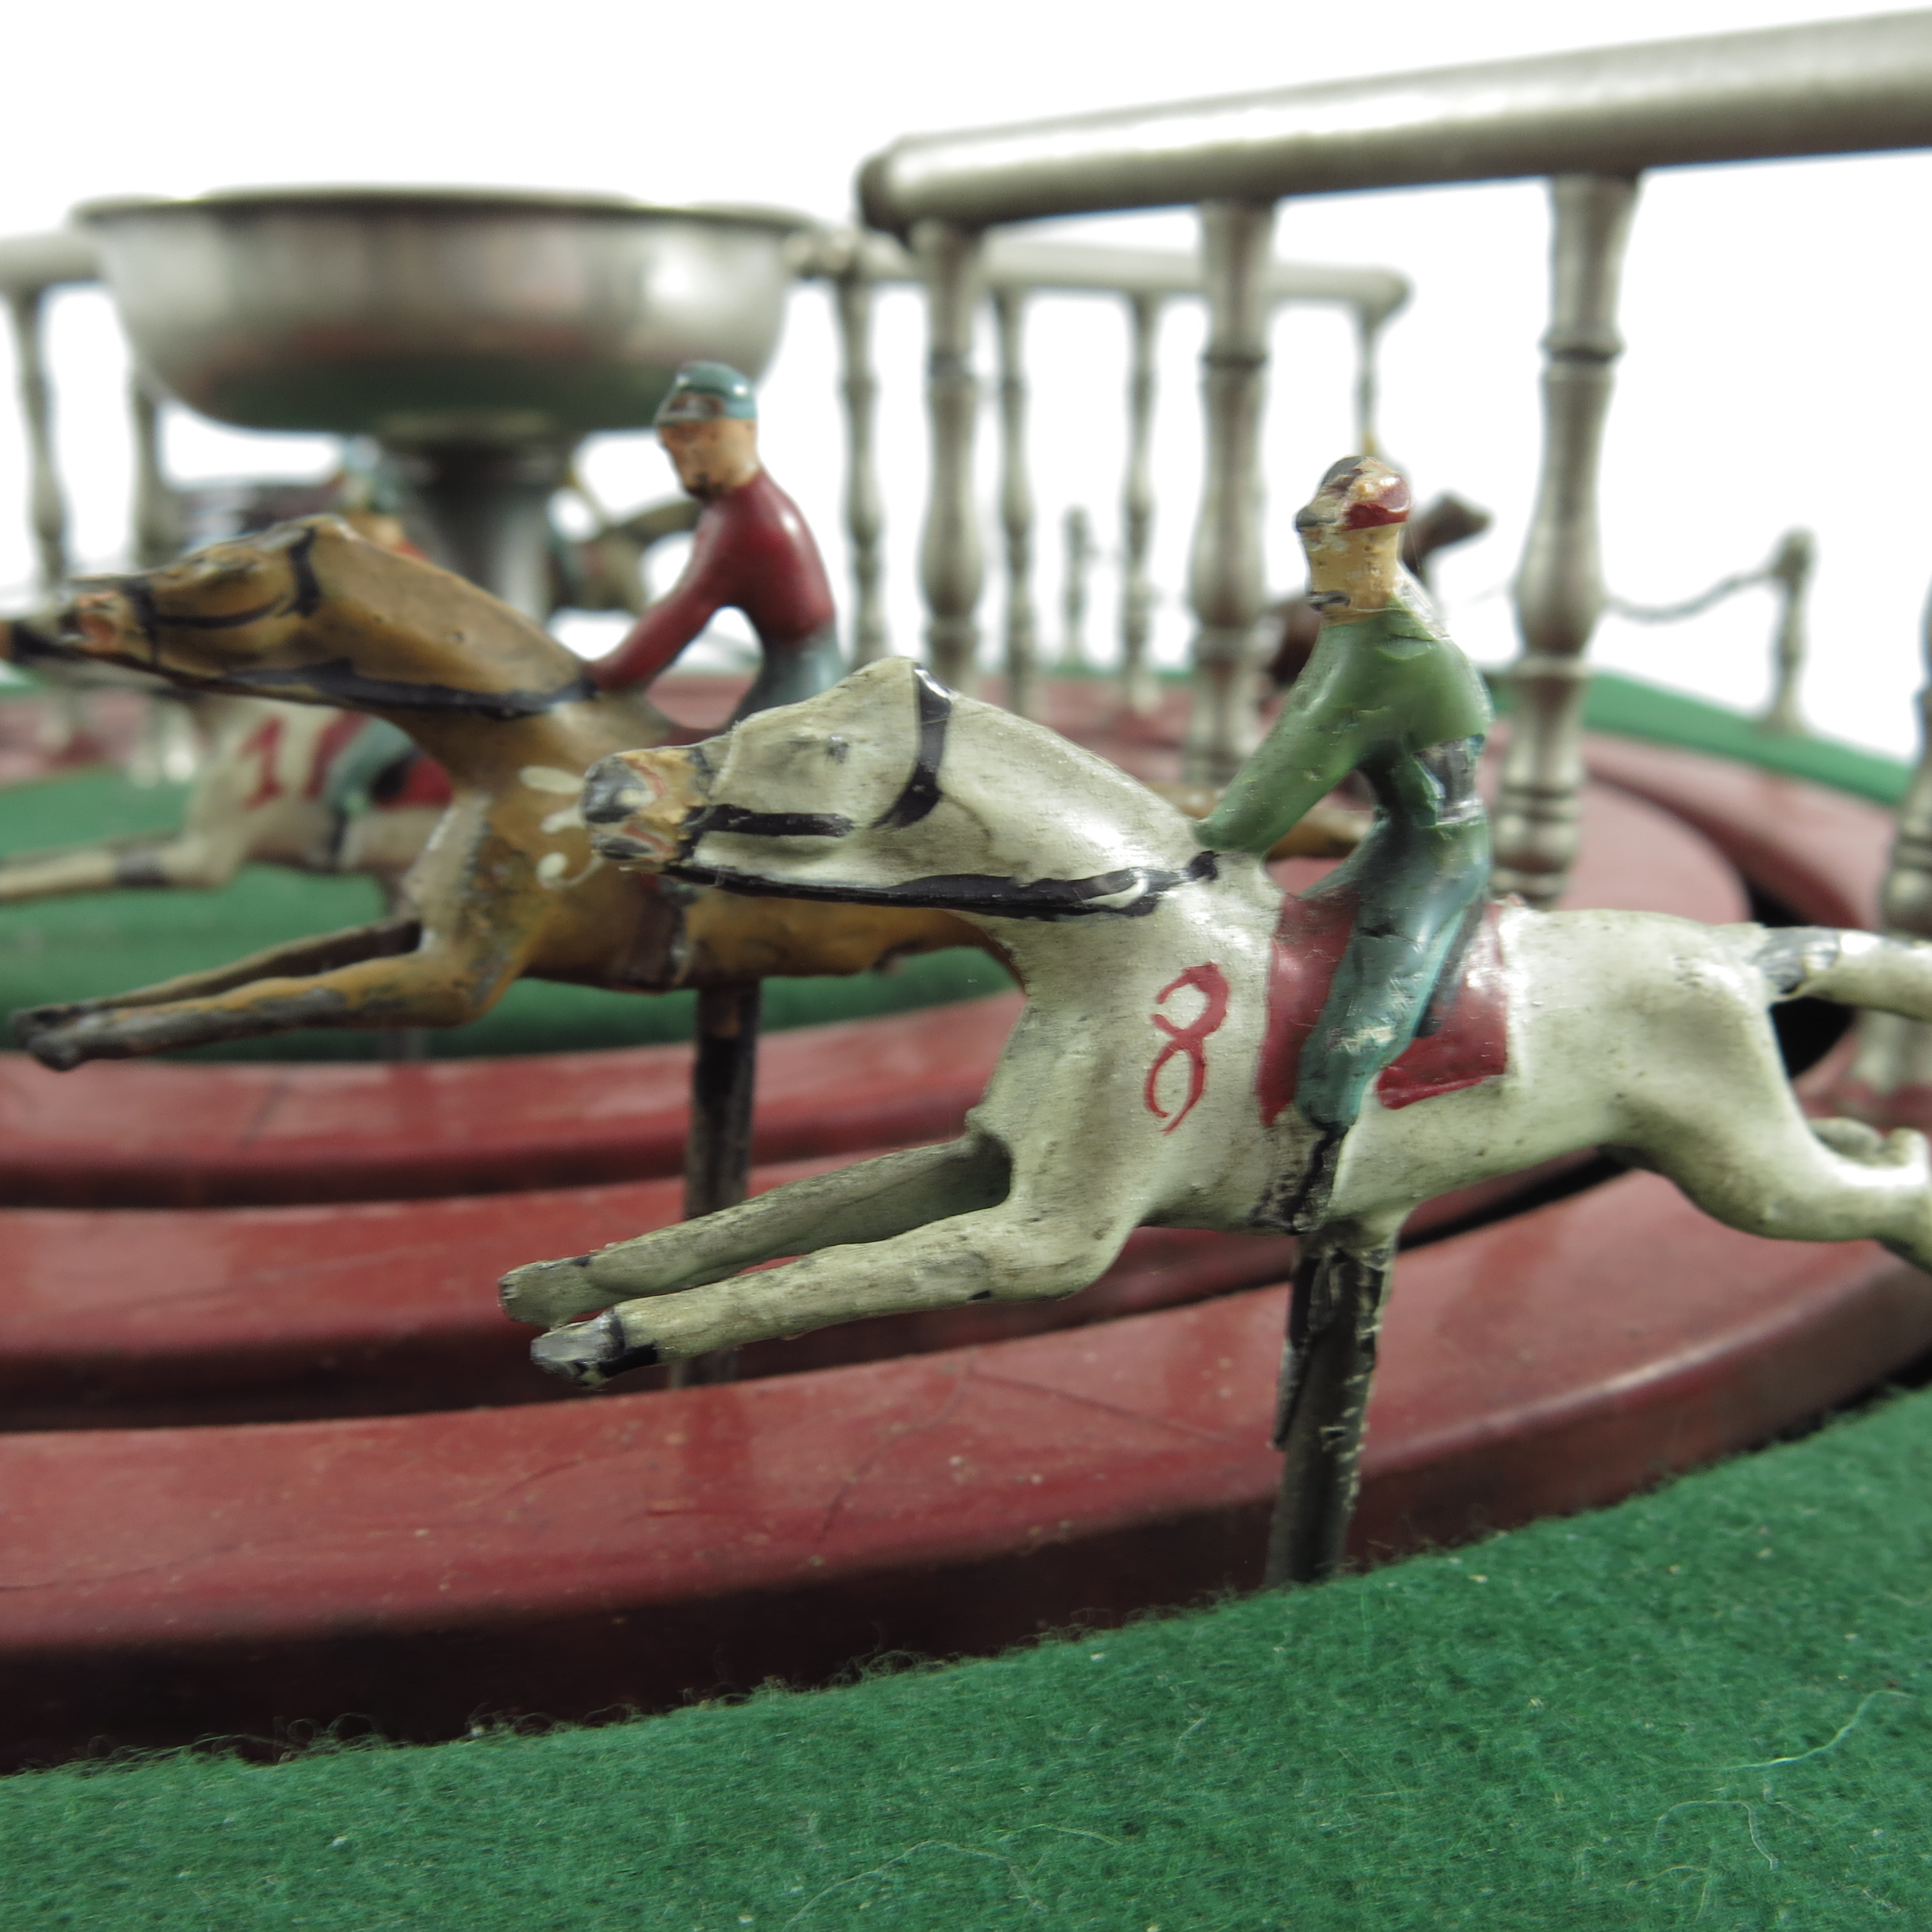 JOEP, AN EARLY 20TH CENTURY FRENCH MECHANICAL HORSE RACING GAME, 'JEU DE COURSE' - Image 3 of 7